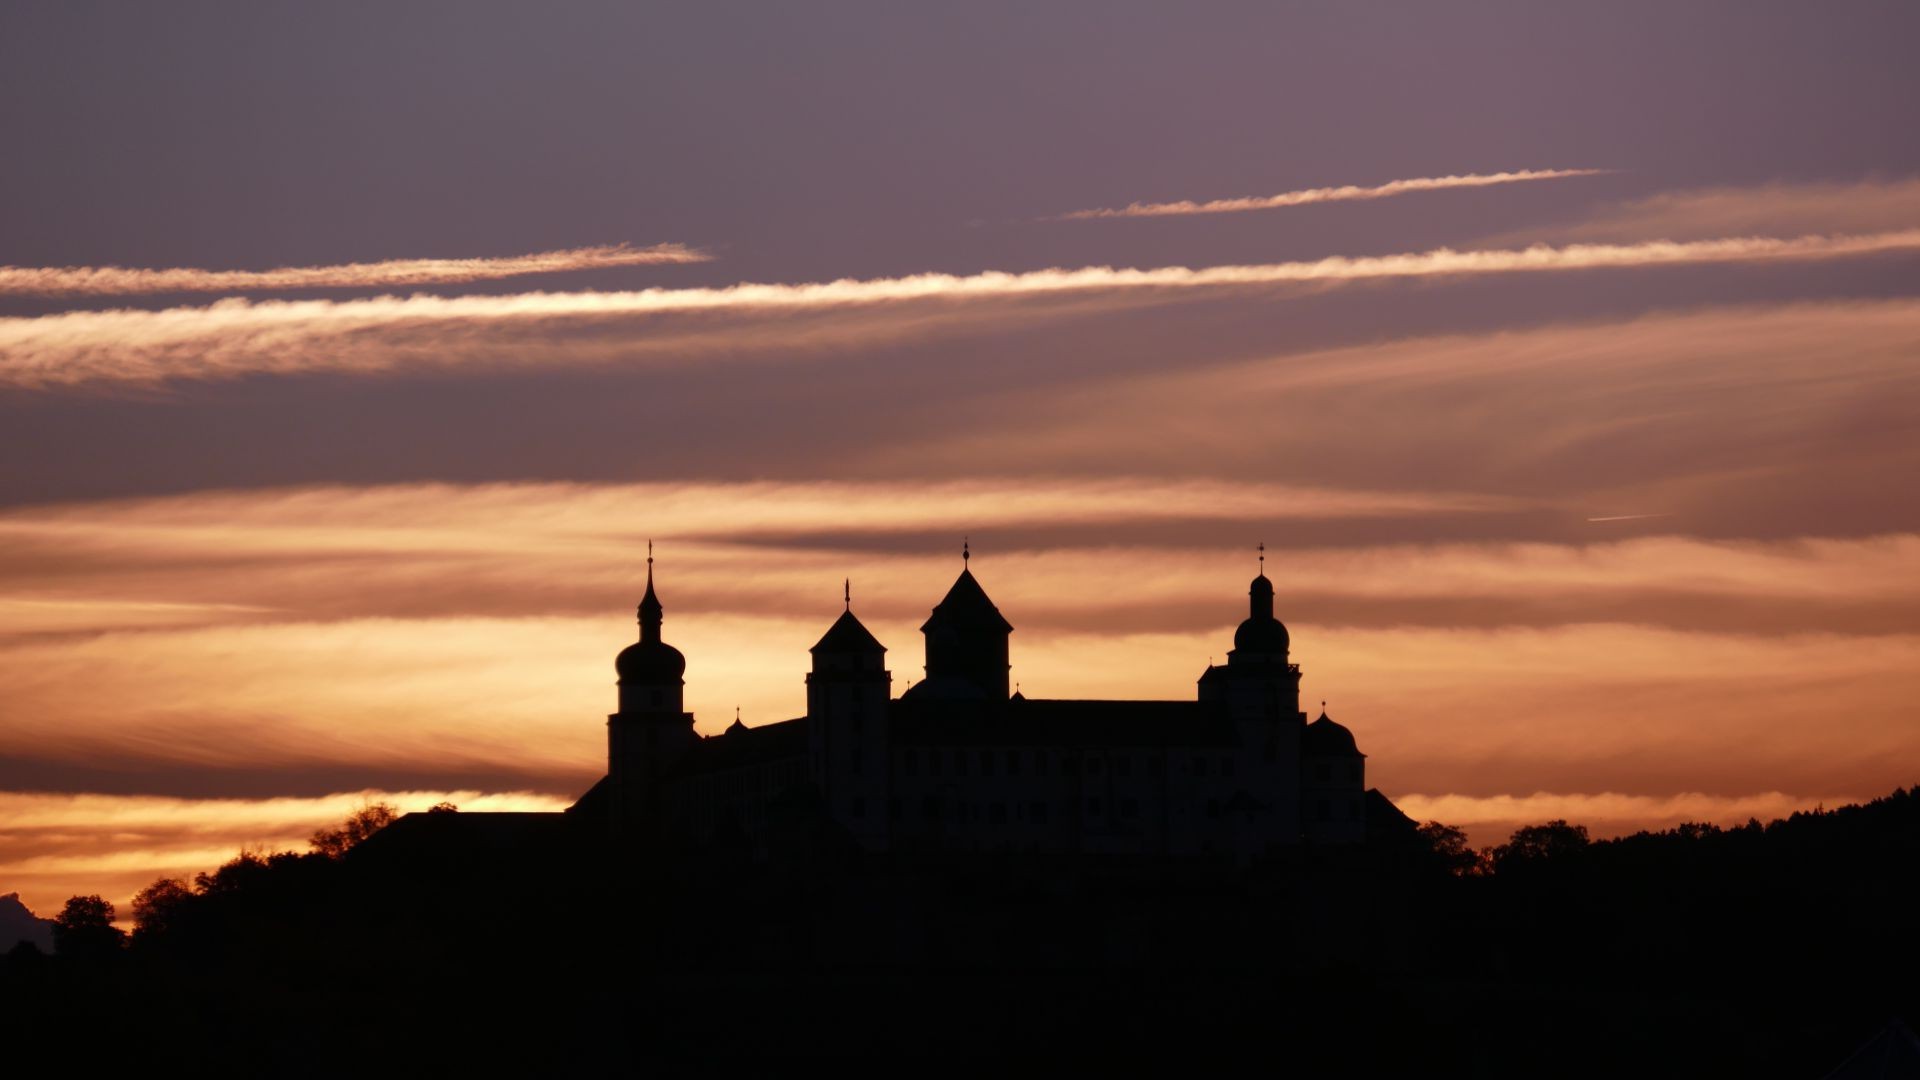 architecture, Castle, Nature, Landscape, Trees, Germany, Fortress, Tower, Silhouette, Clouds, Sunset Wallpaper